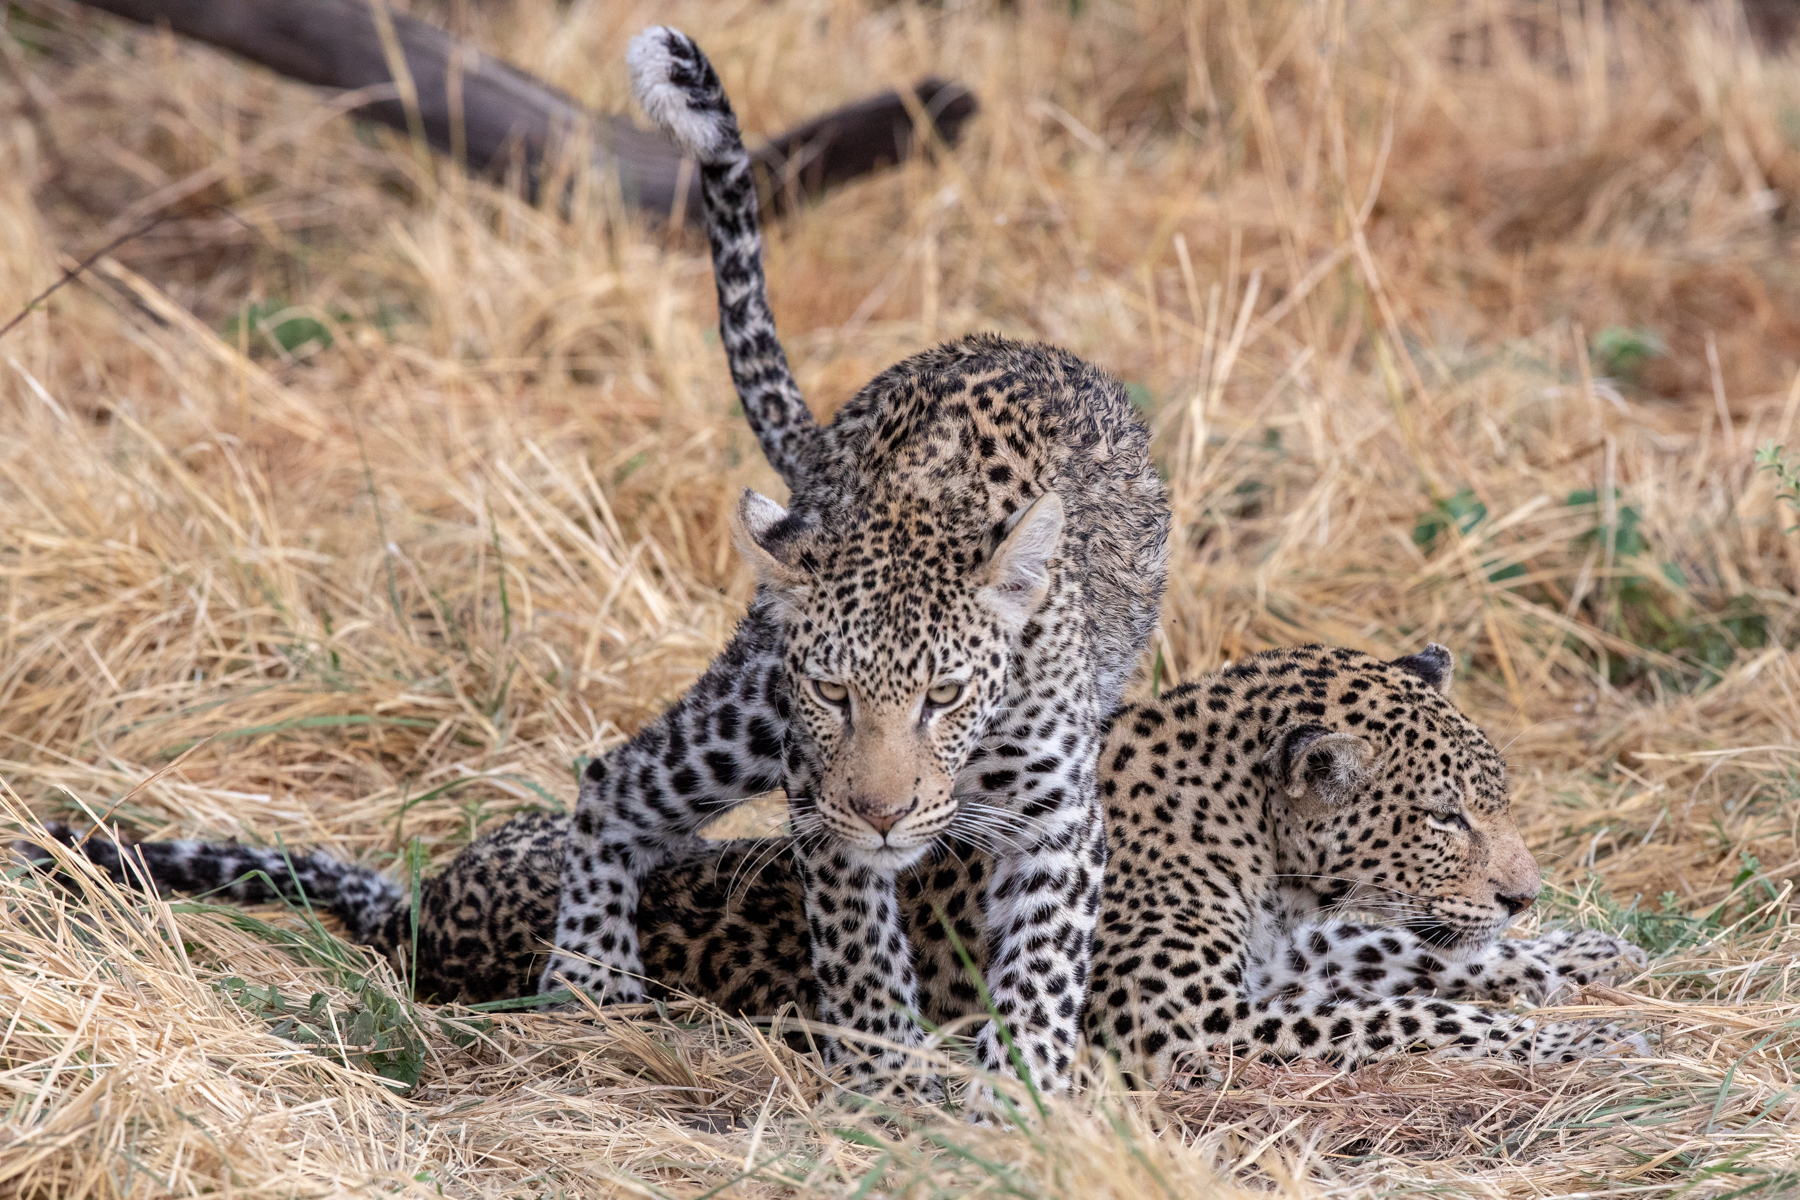 Female Leopard and her almost full-grown male cub